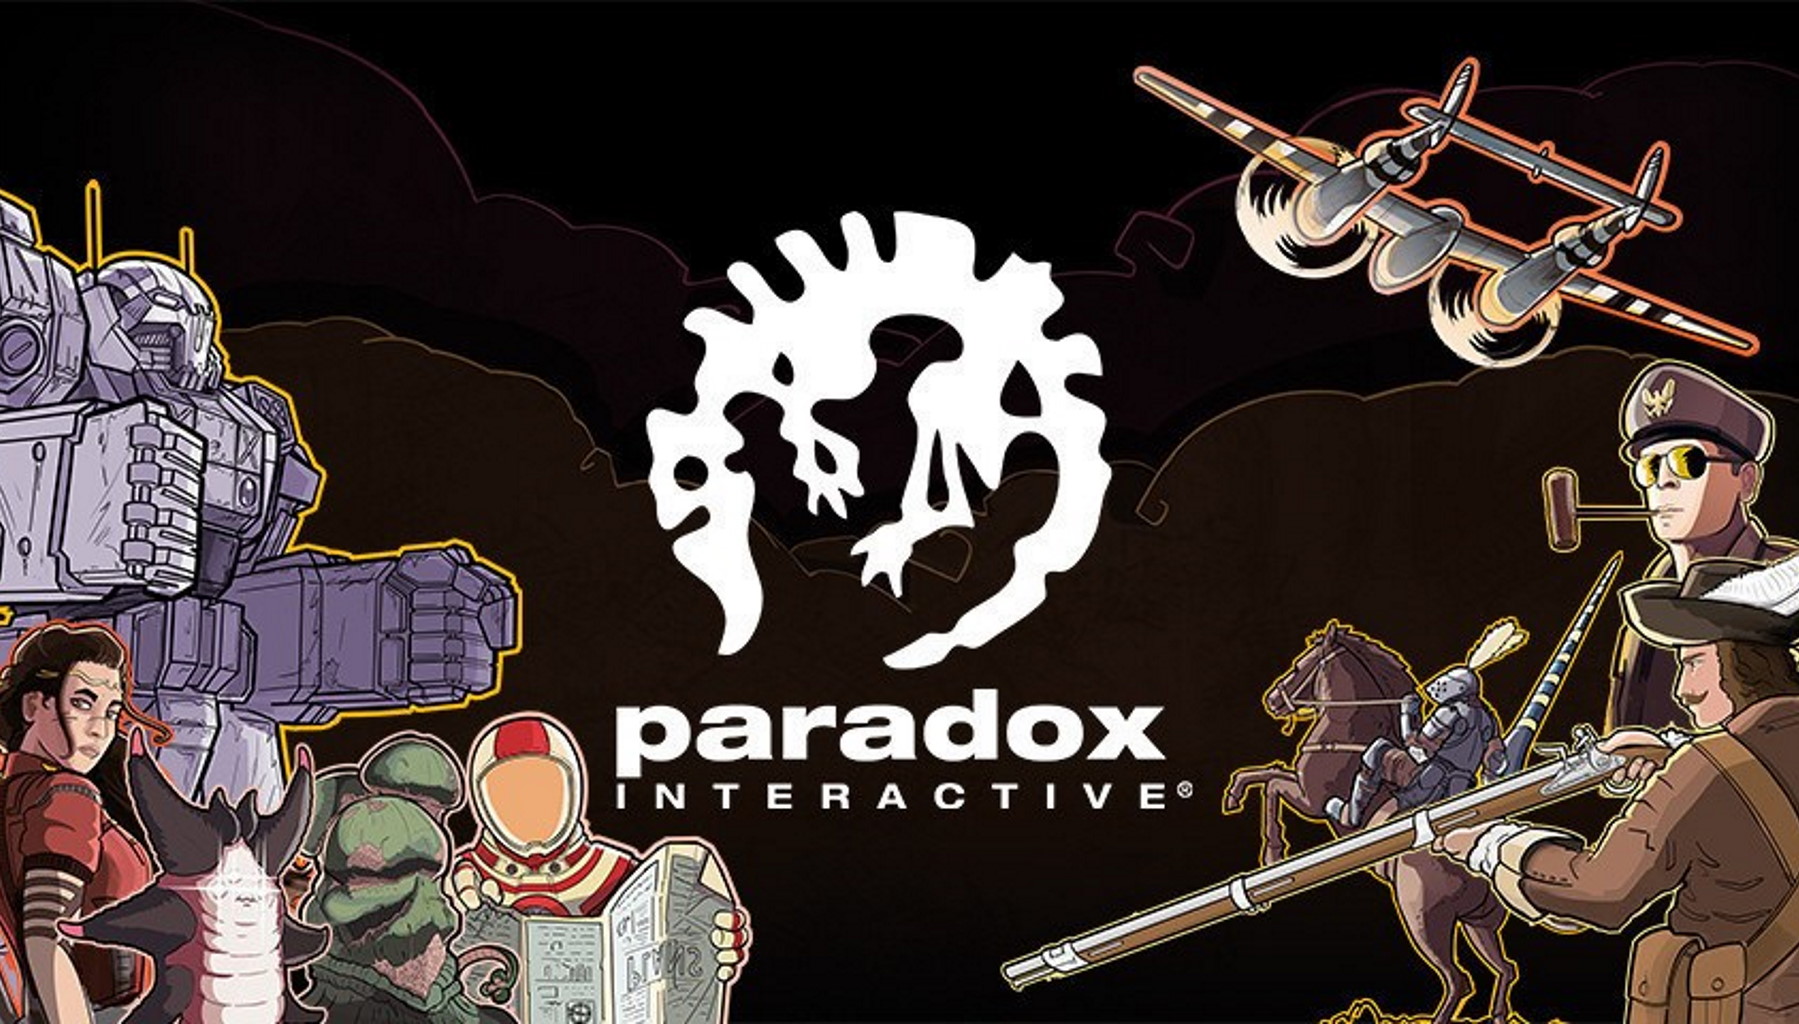 'It's Hard To Be A Woman In This Company': More Details Of Sexual Harassment At Paradox Interactive Emerge thumbnail